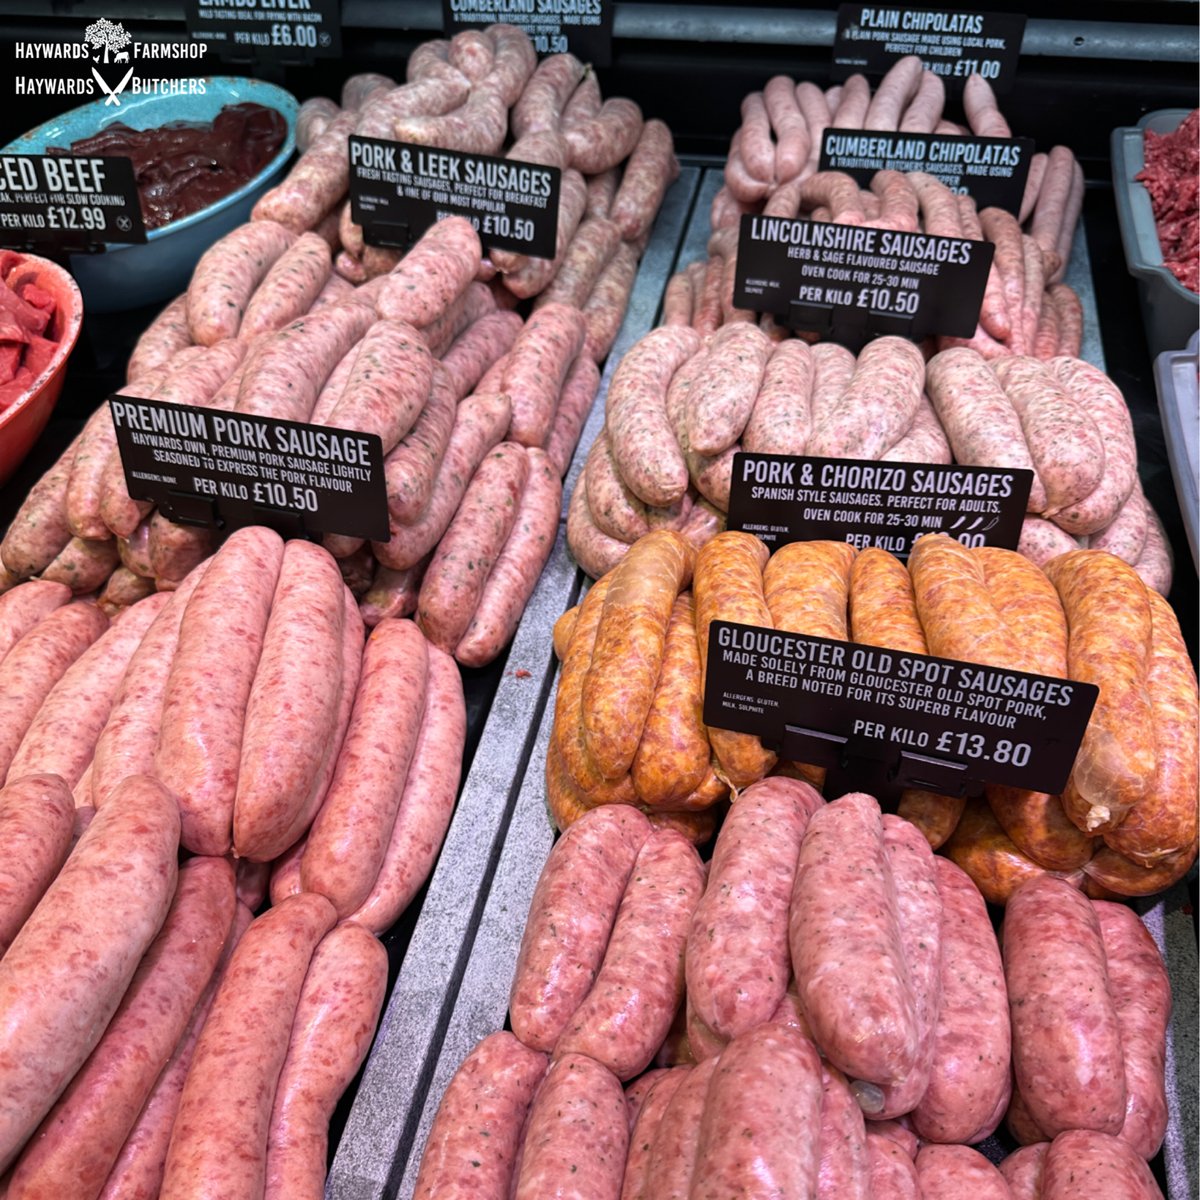 Did you know we have over 30 varieties of sausages all handmade at Haywards! There is a different selection available each week! #HandmadeSausages #SausageVariety #GrillingGoodness #SavoryDelights #BBQEssentials #TasteAdventure #SausageLovers #Tonbridge #Haywards1990